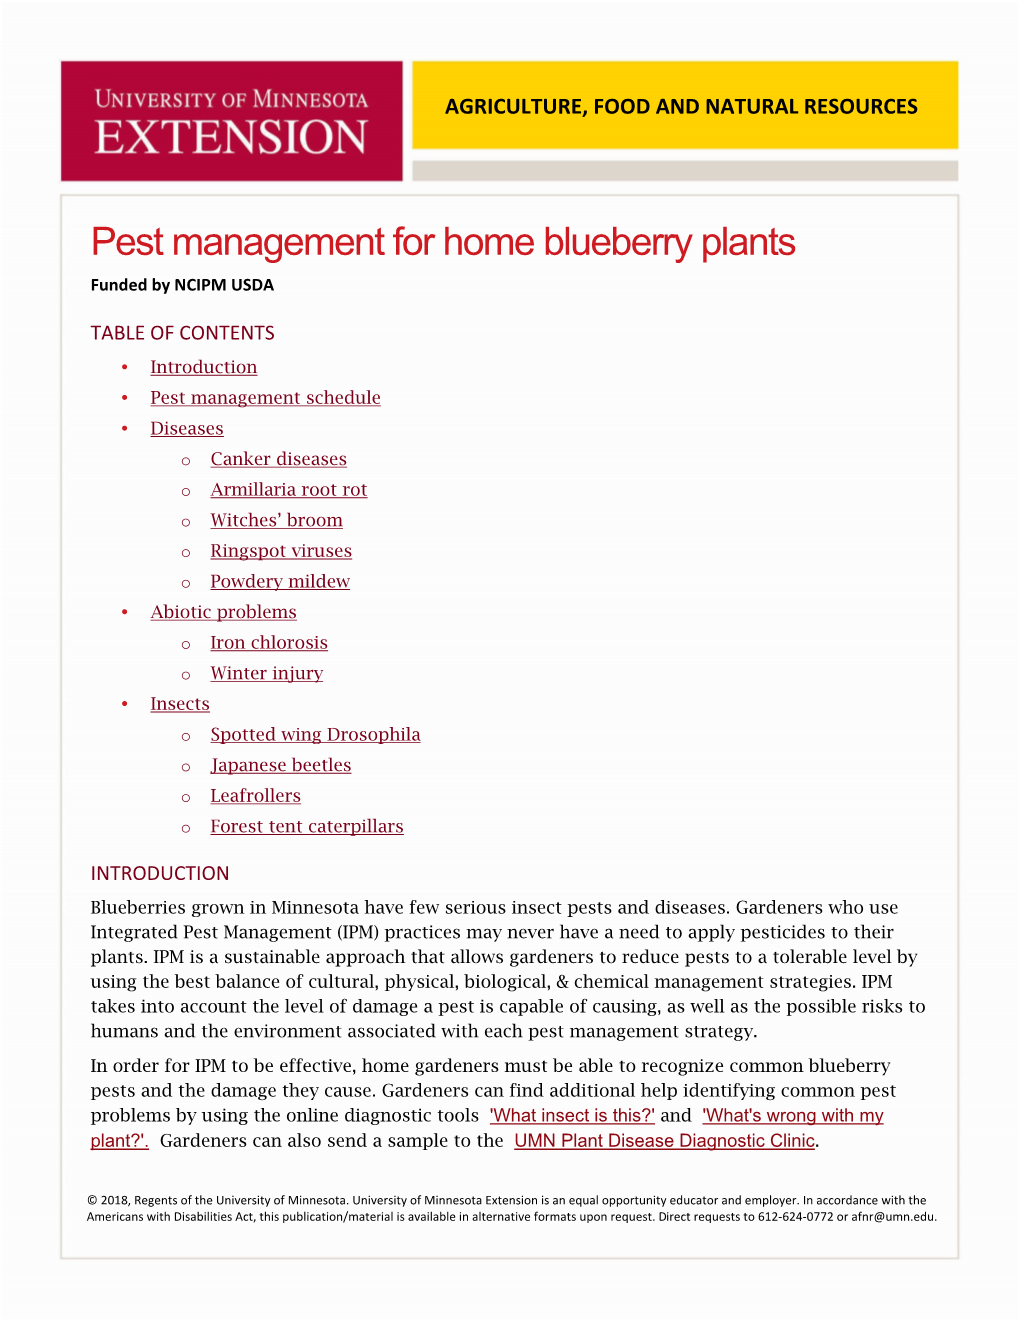 Pest Management for Home Blueberry Plants Funded by NCIPM USDA